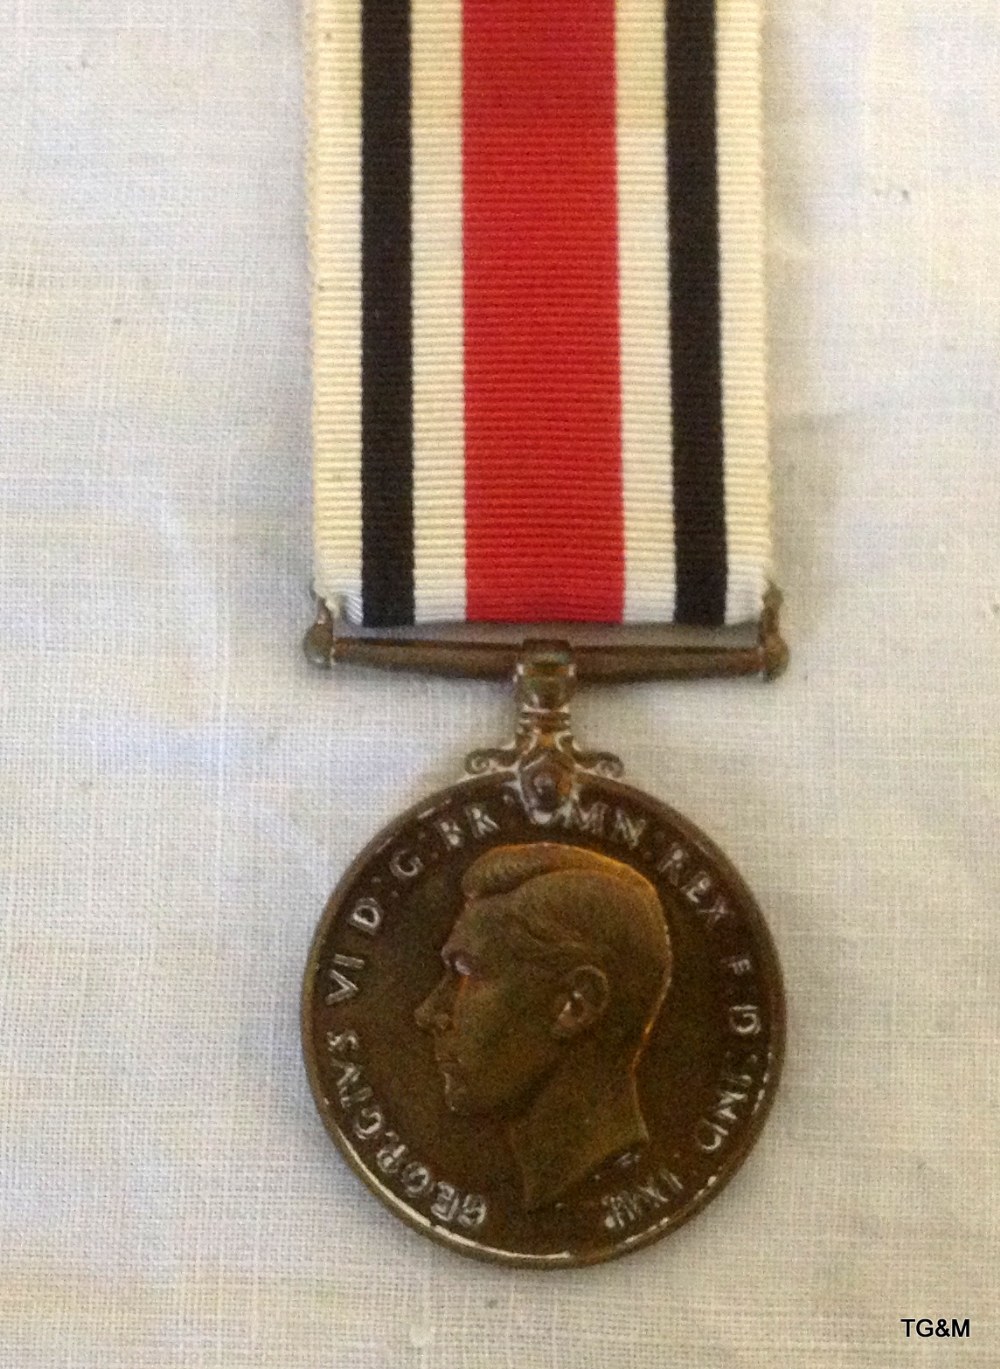 A George VI Special Constabulary Medal to Sergeant James N. Nightingale